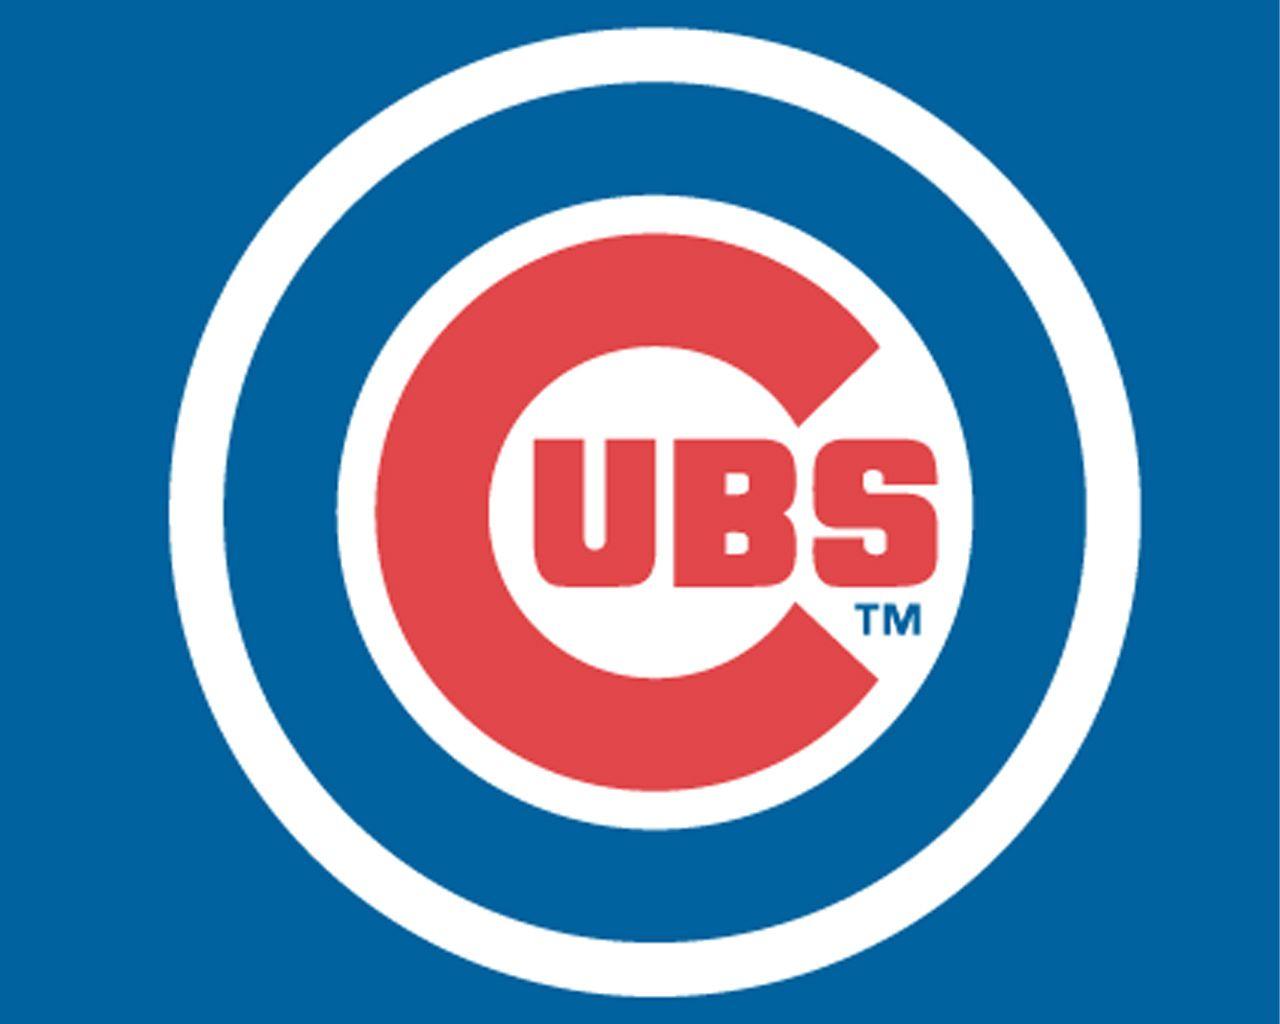 Cubs News and Notes: Recapping Our 4 Game Win Streak